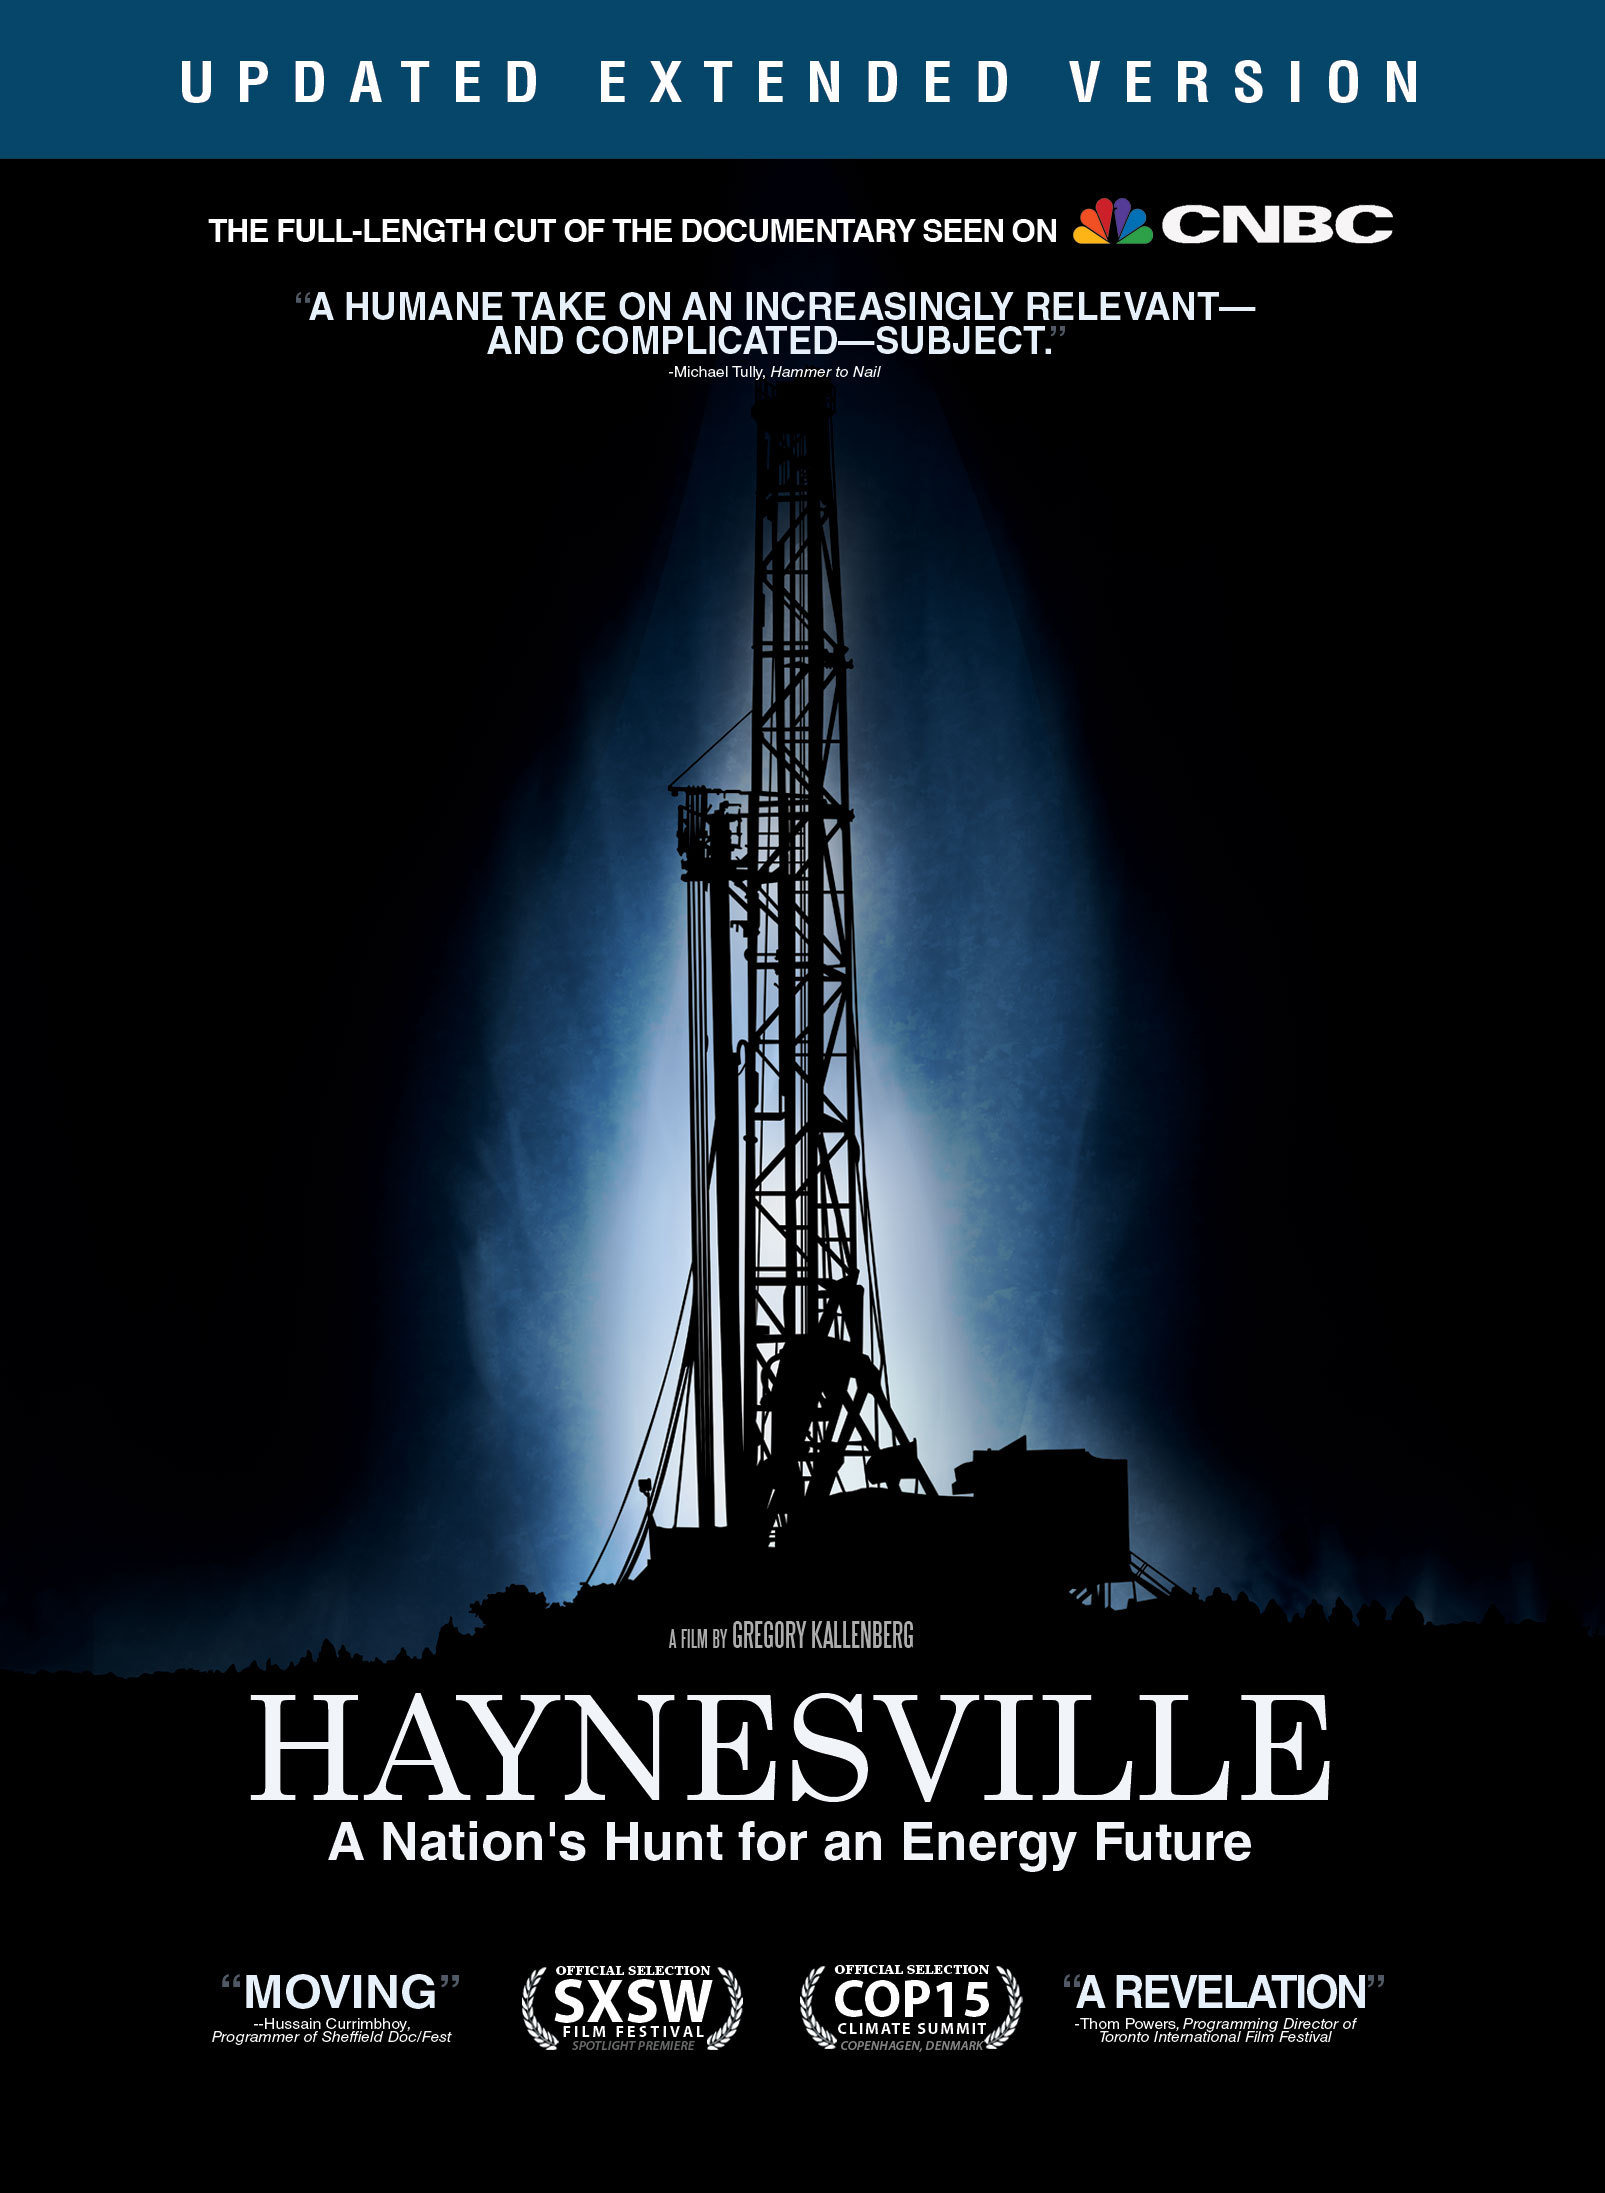 Haynesville: A Nation's Hunt for an Energy Future